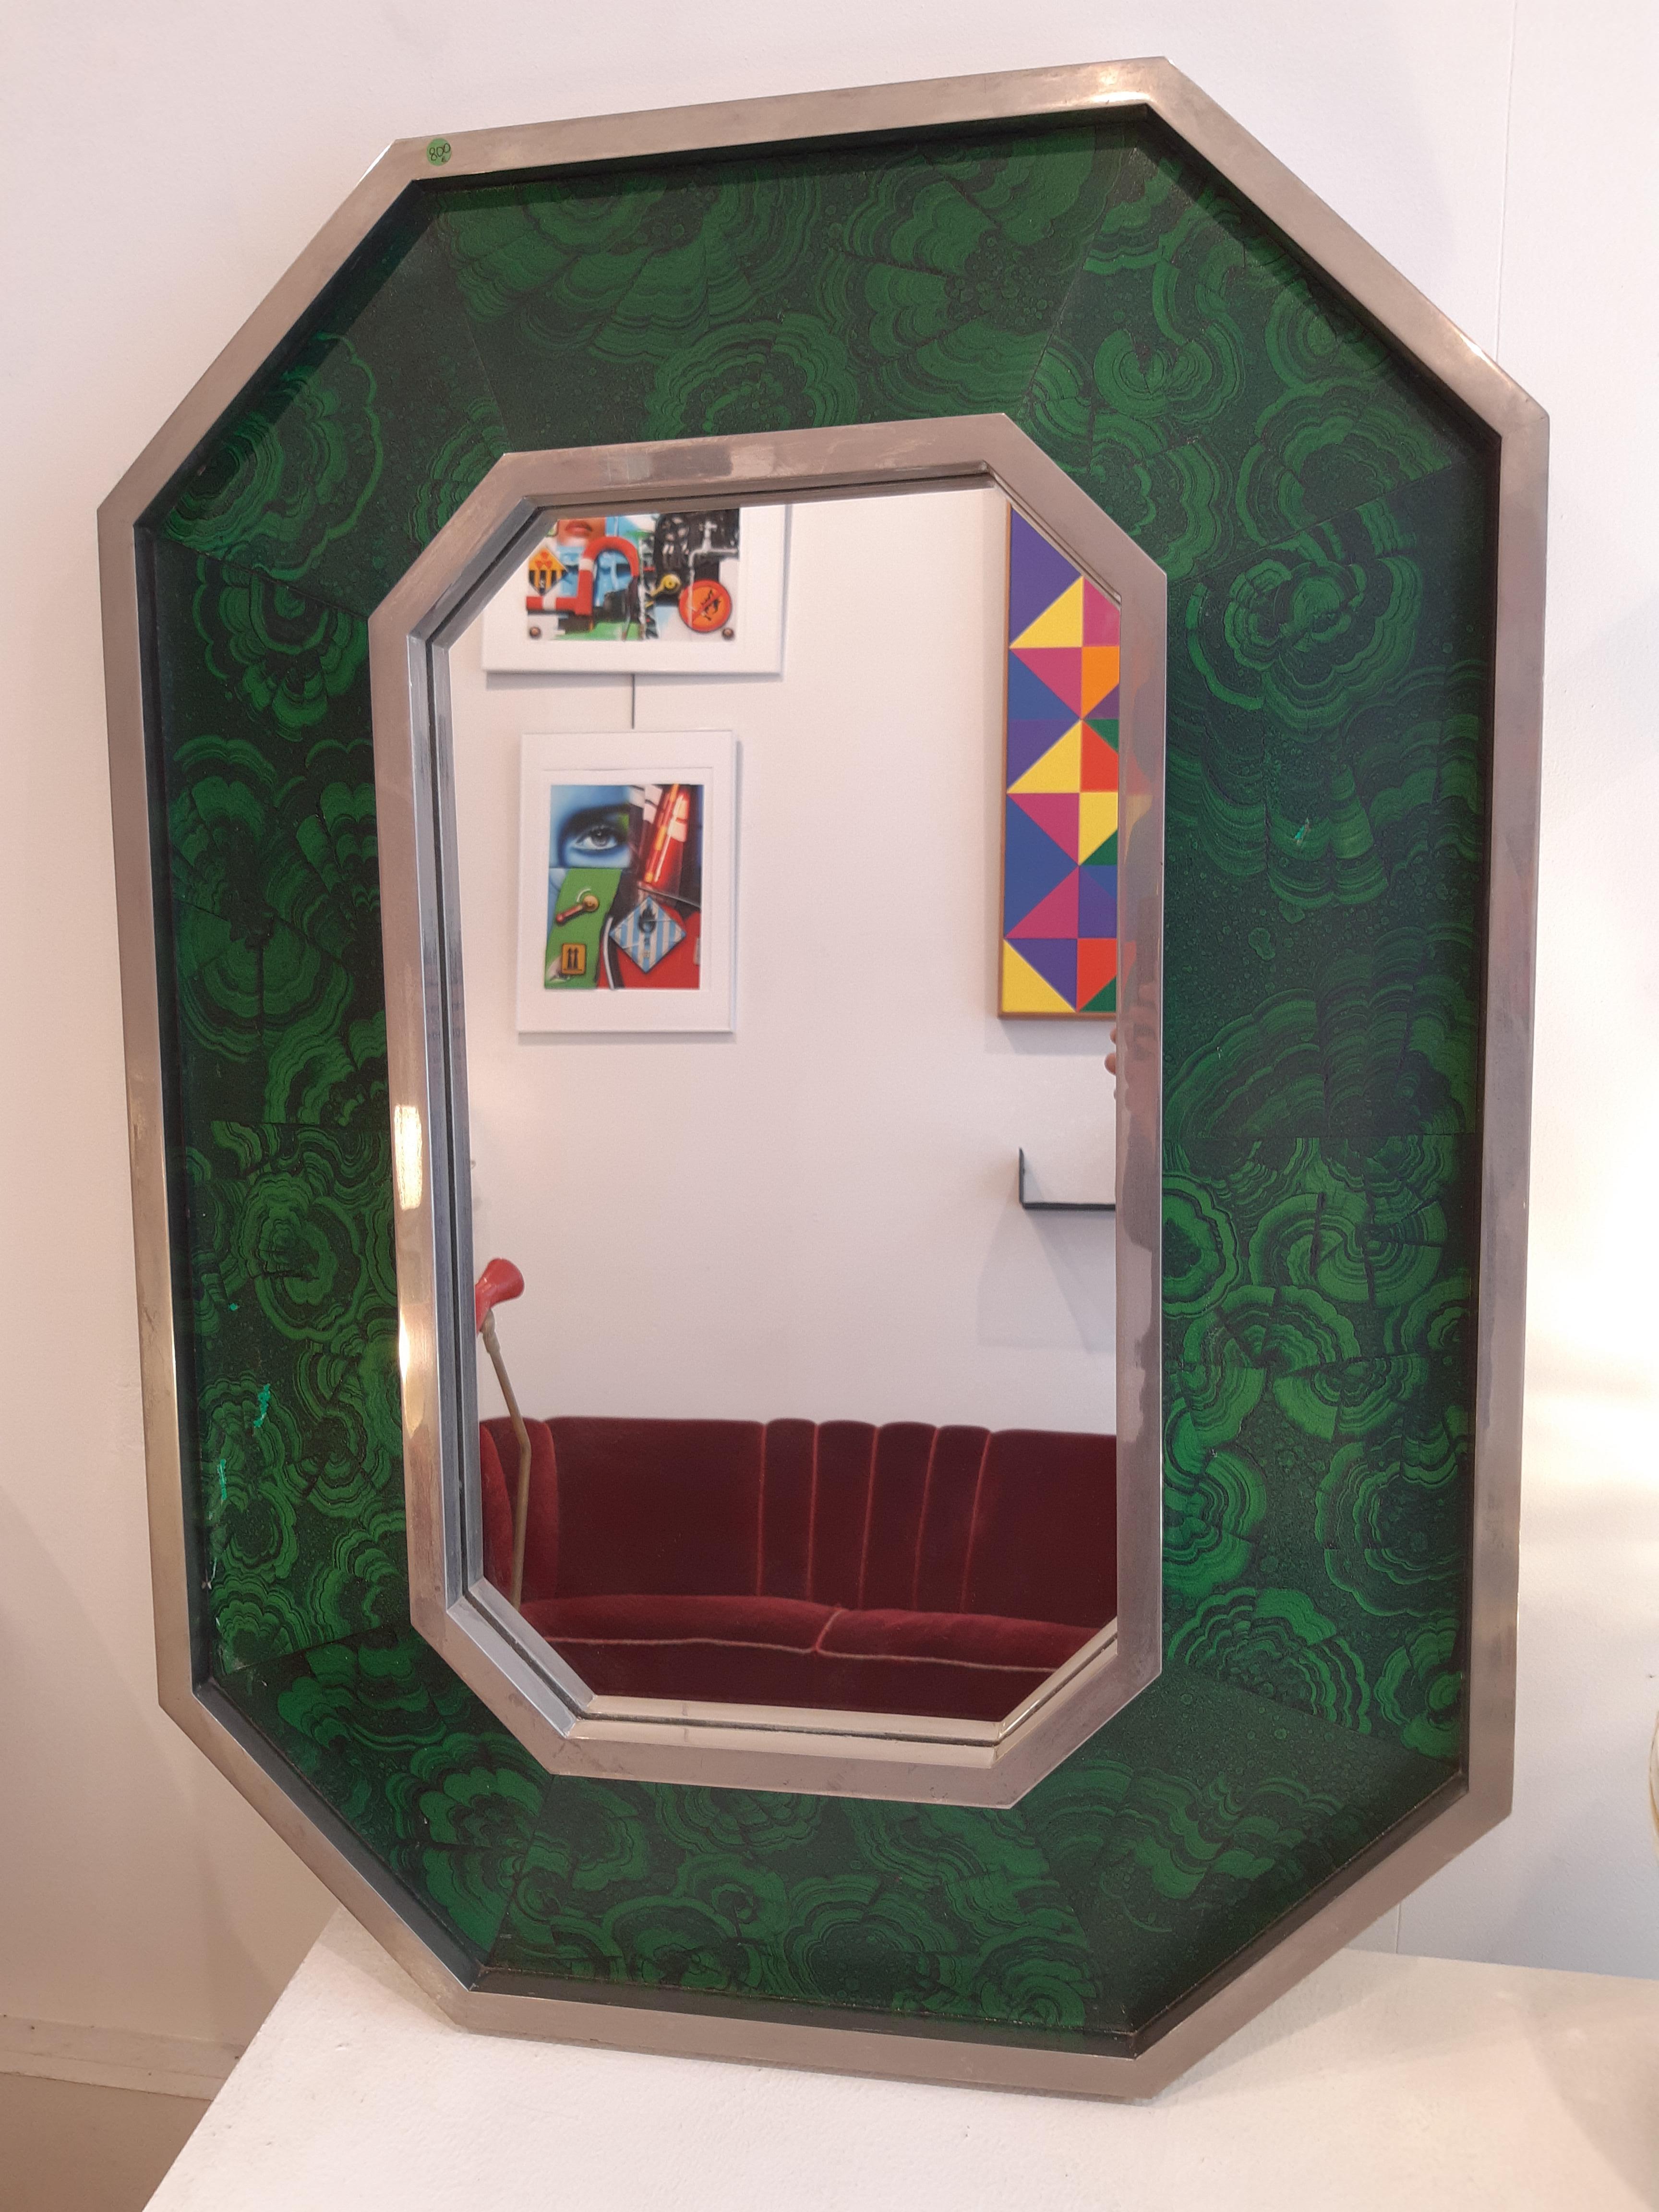 Octogonal mirror, Jansen style 1970s with faux malachite 
Measures: Height 95cm, depth 68cm, width 11cm. 
Scratches on the bottom left and a tiny at the top right
Very elegant mirror with great dimensions.